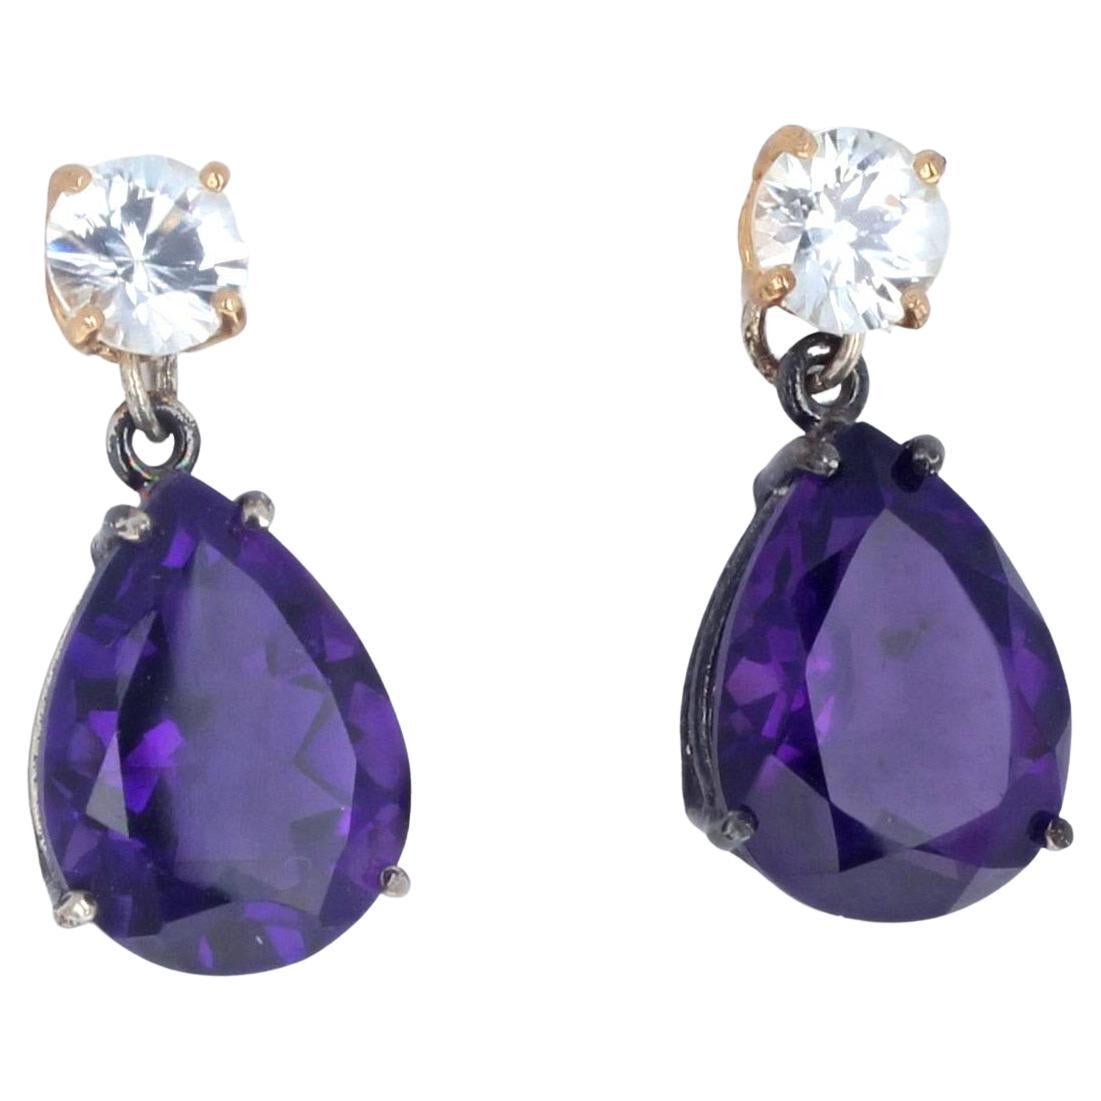 AJD Magnificent Brilliant Natural White Zircon & Intense Amethyst Stud Earrings